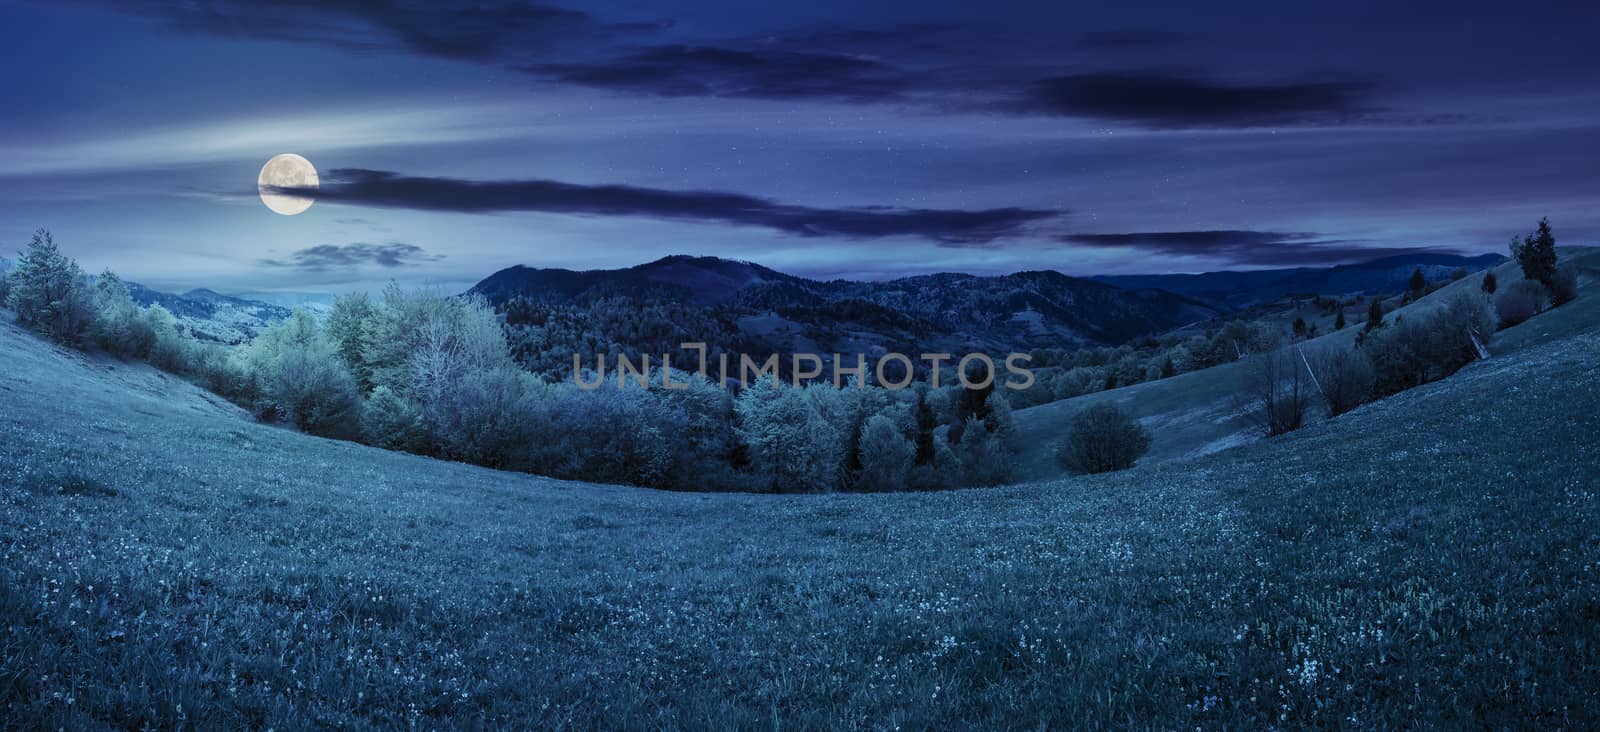 panoramic mountain summer landscape. trees near meadow and forest on hillside at night in full moon light